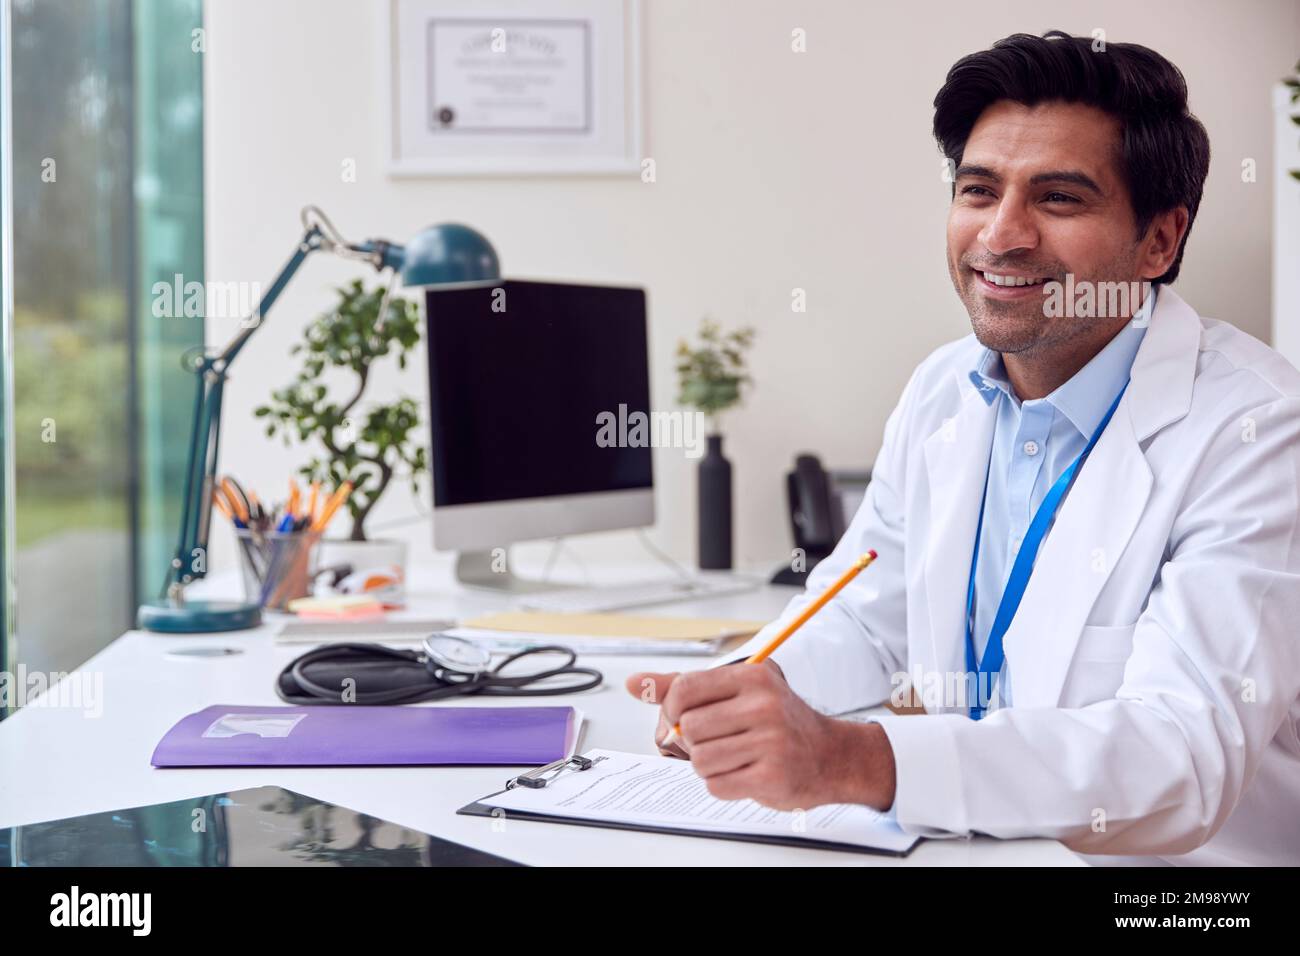 Male Doctor Or GP Wearing White Coat Sitting At Desk In Office Writing Notes On Clipboard Stock Photo